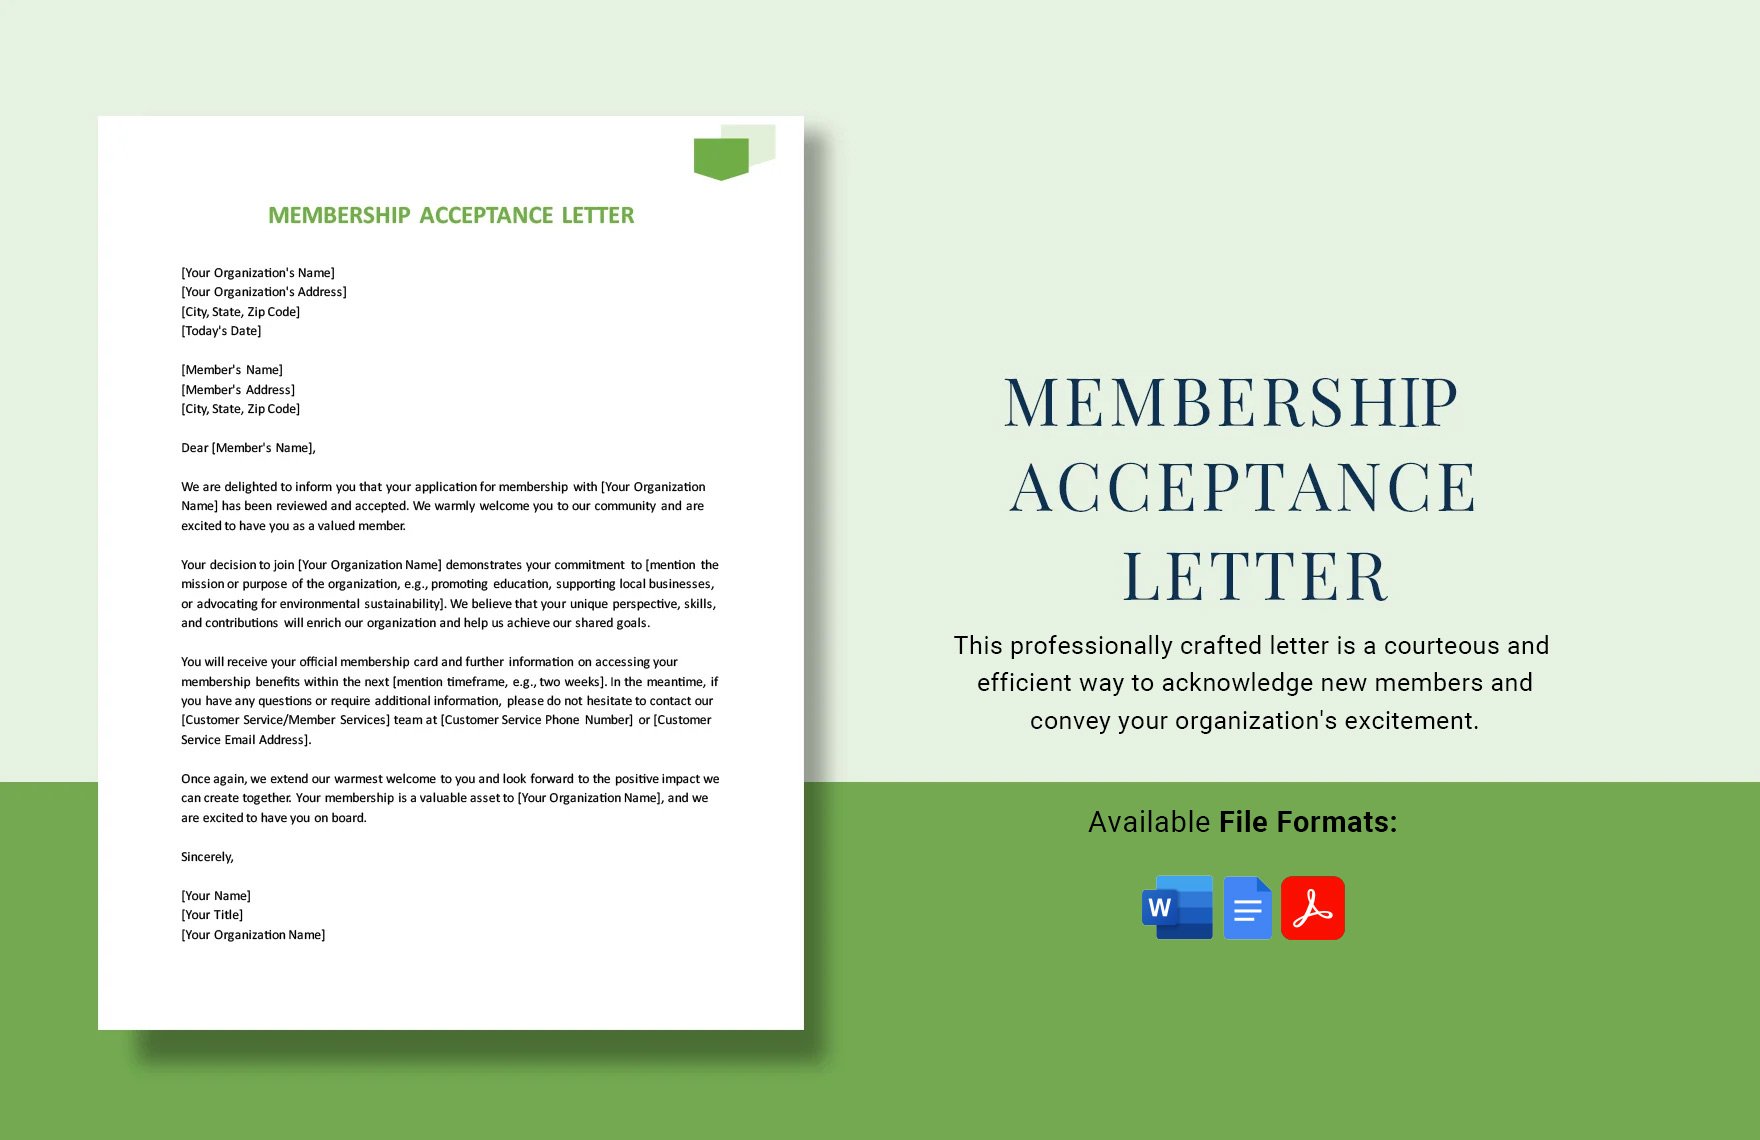 Membership Acceptance Letter in Word, Google Docs, PDF